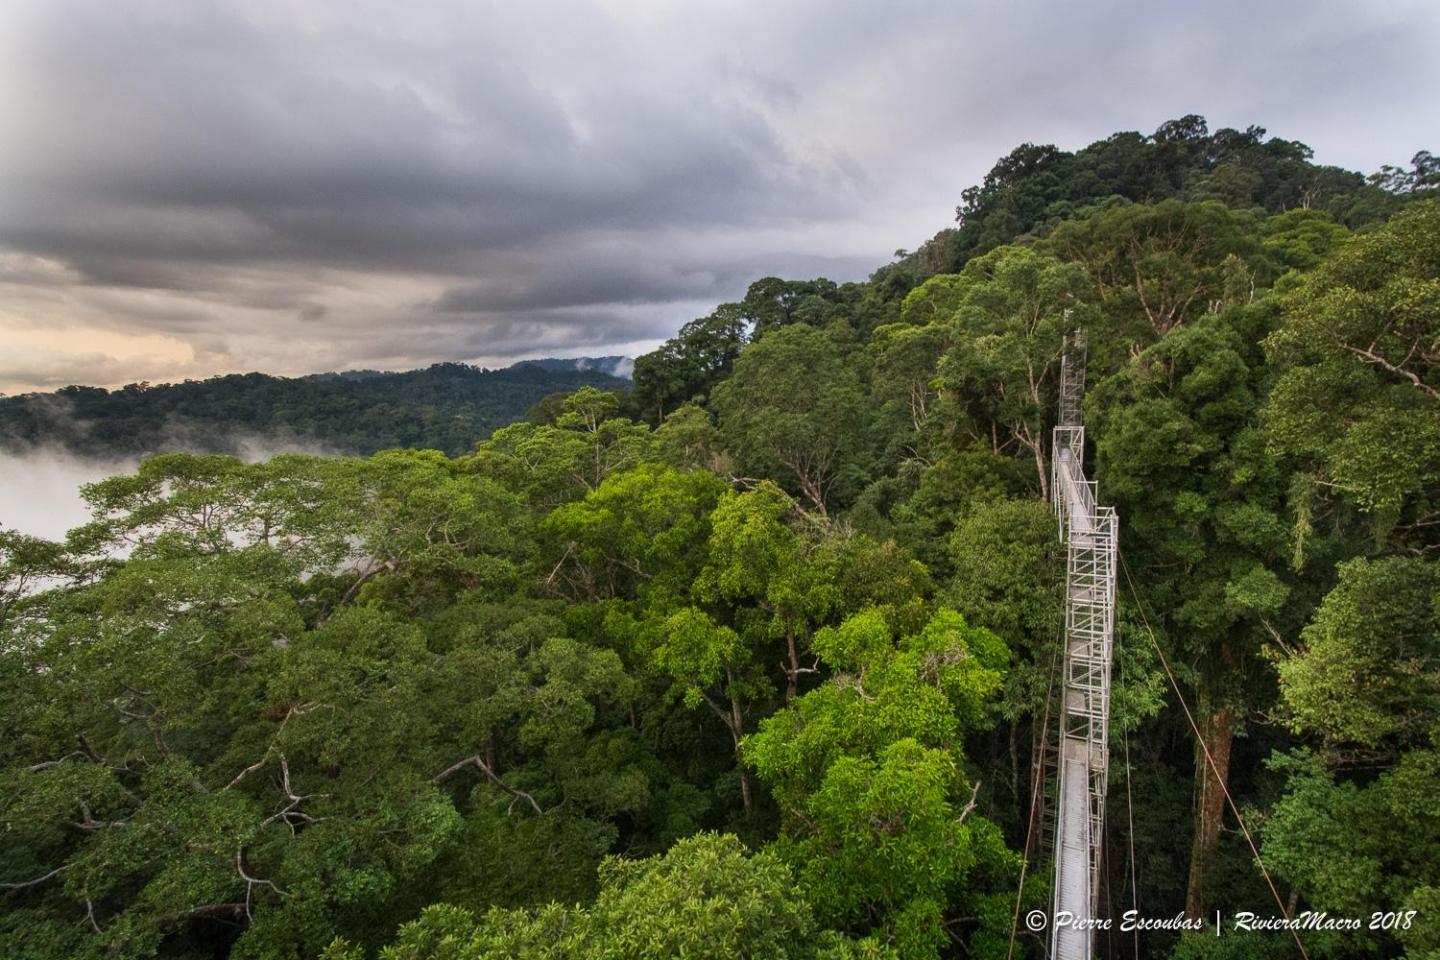 View of the Ulu Temburong National Park in Brunei from the Canopy Bridge